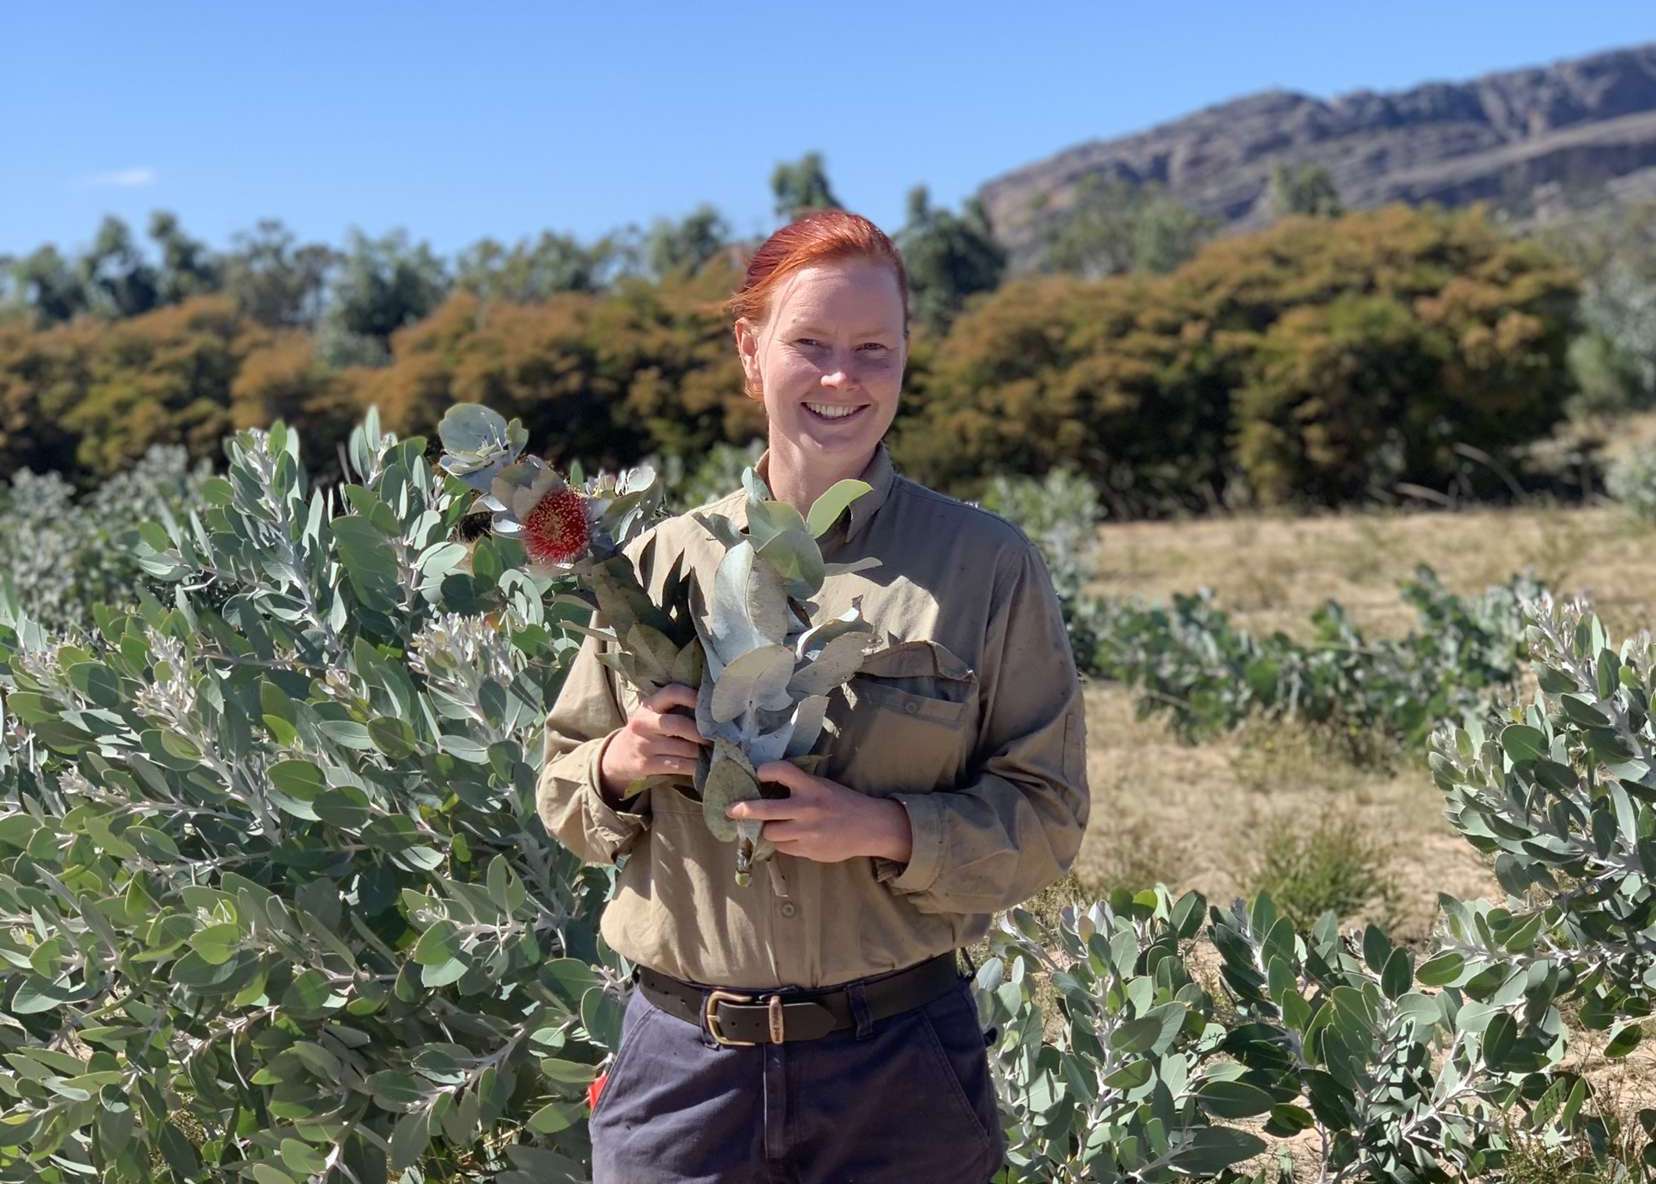 Rose currently works in a production nursery at one of the largest native cut flowers farms in Australia. She is now based in Western Victoria after moving from South East Queensland earlier this year. Image: Gemma Hutchinson 